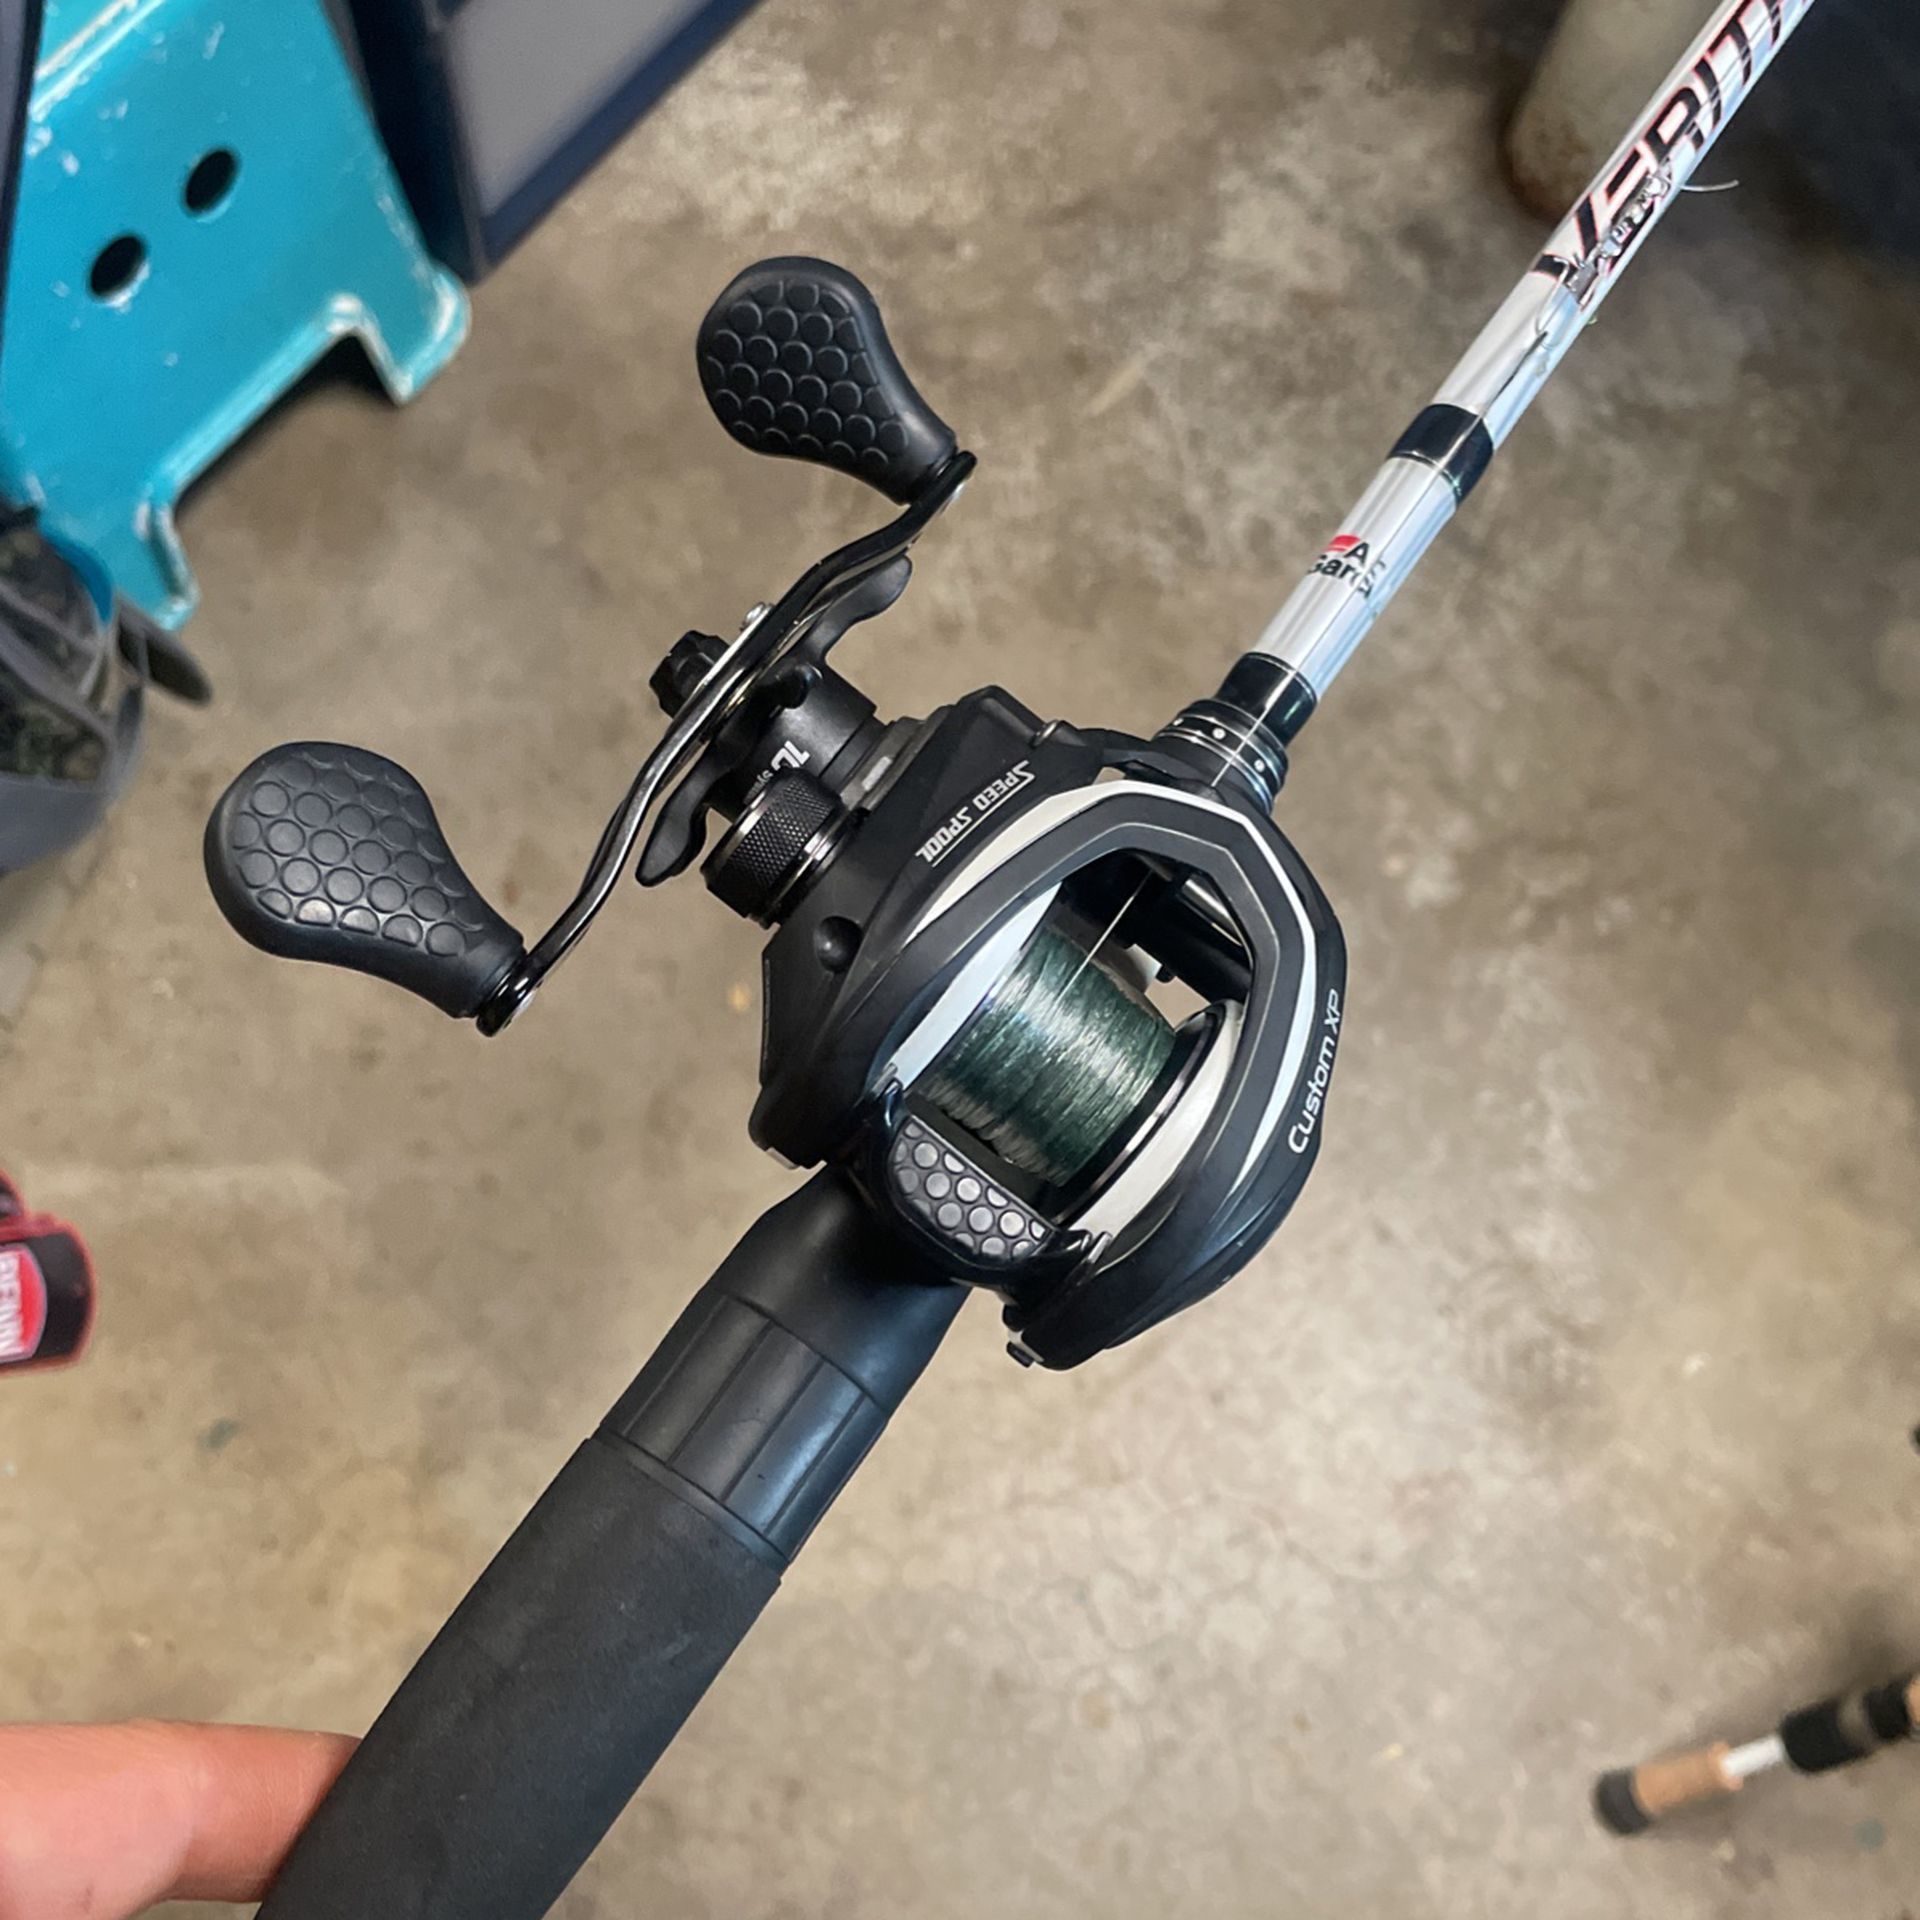 Fishing Pole And Reel, Lews Custom Xp Left Hand 7.5:1 Baitcasting Reel And  Abu Garcia Vertas Bait Caster Rod for Sale in Colorado Springs, CO - OfferUp